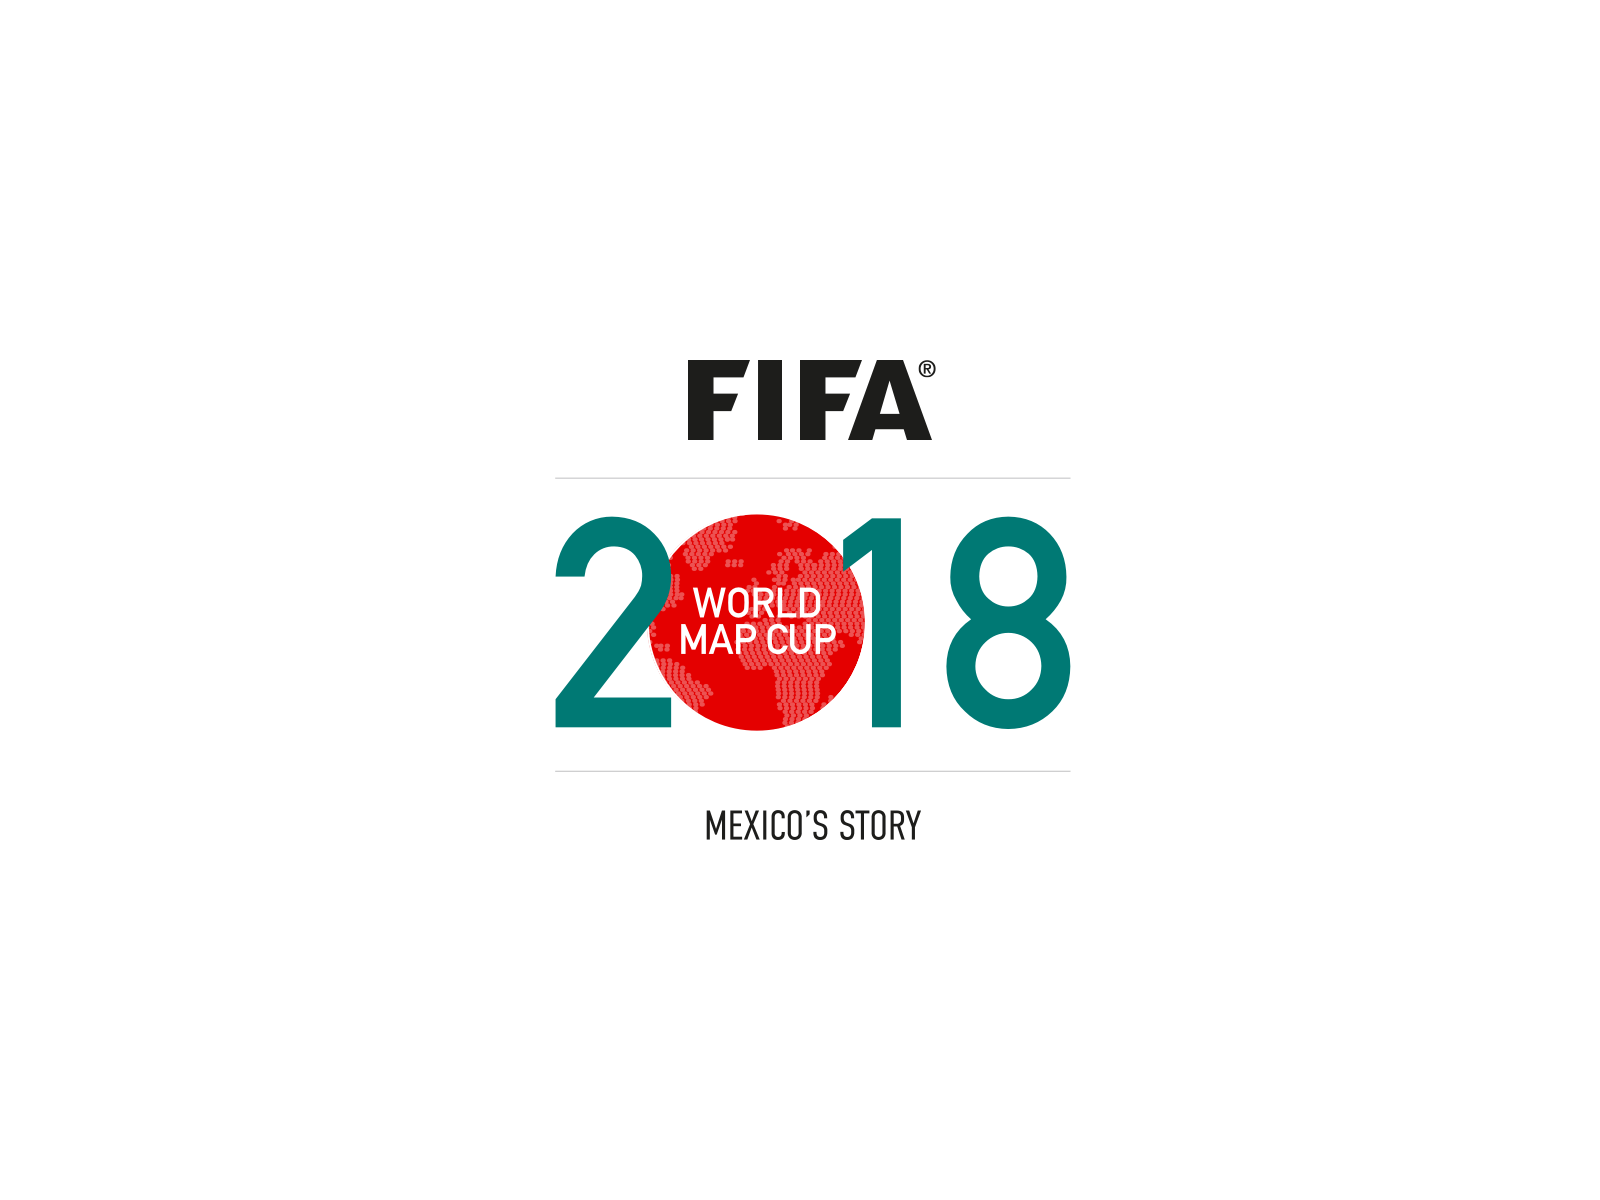 FIFA 2018 WOrld Map Cup - Mexico's Story. Graphic created by Rishad Amarkhel